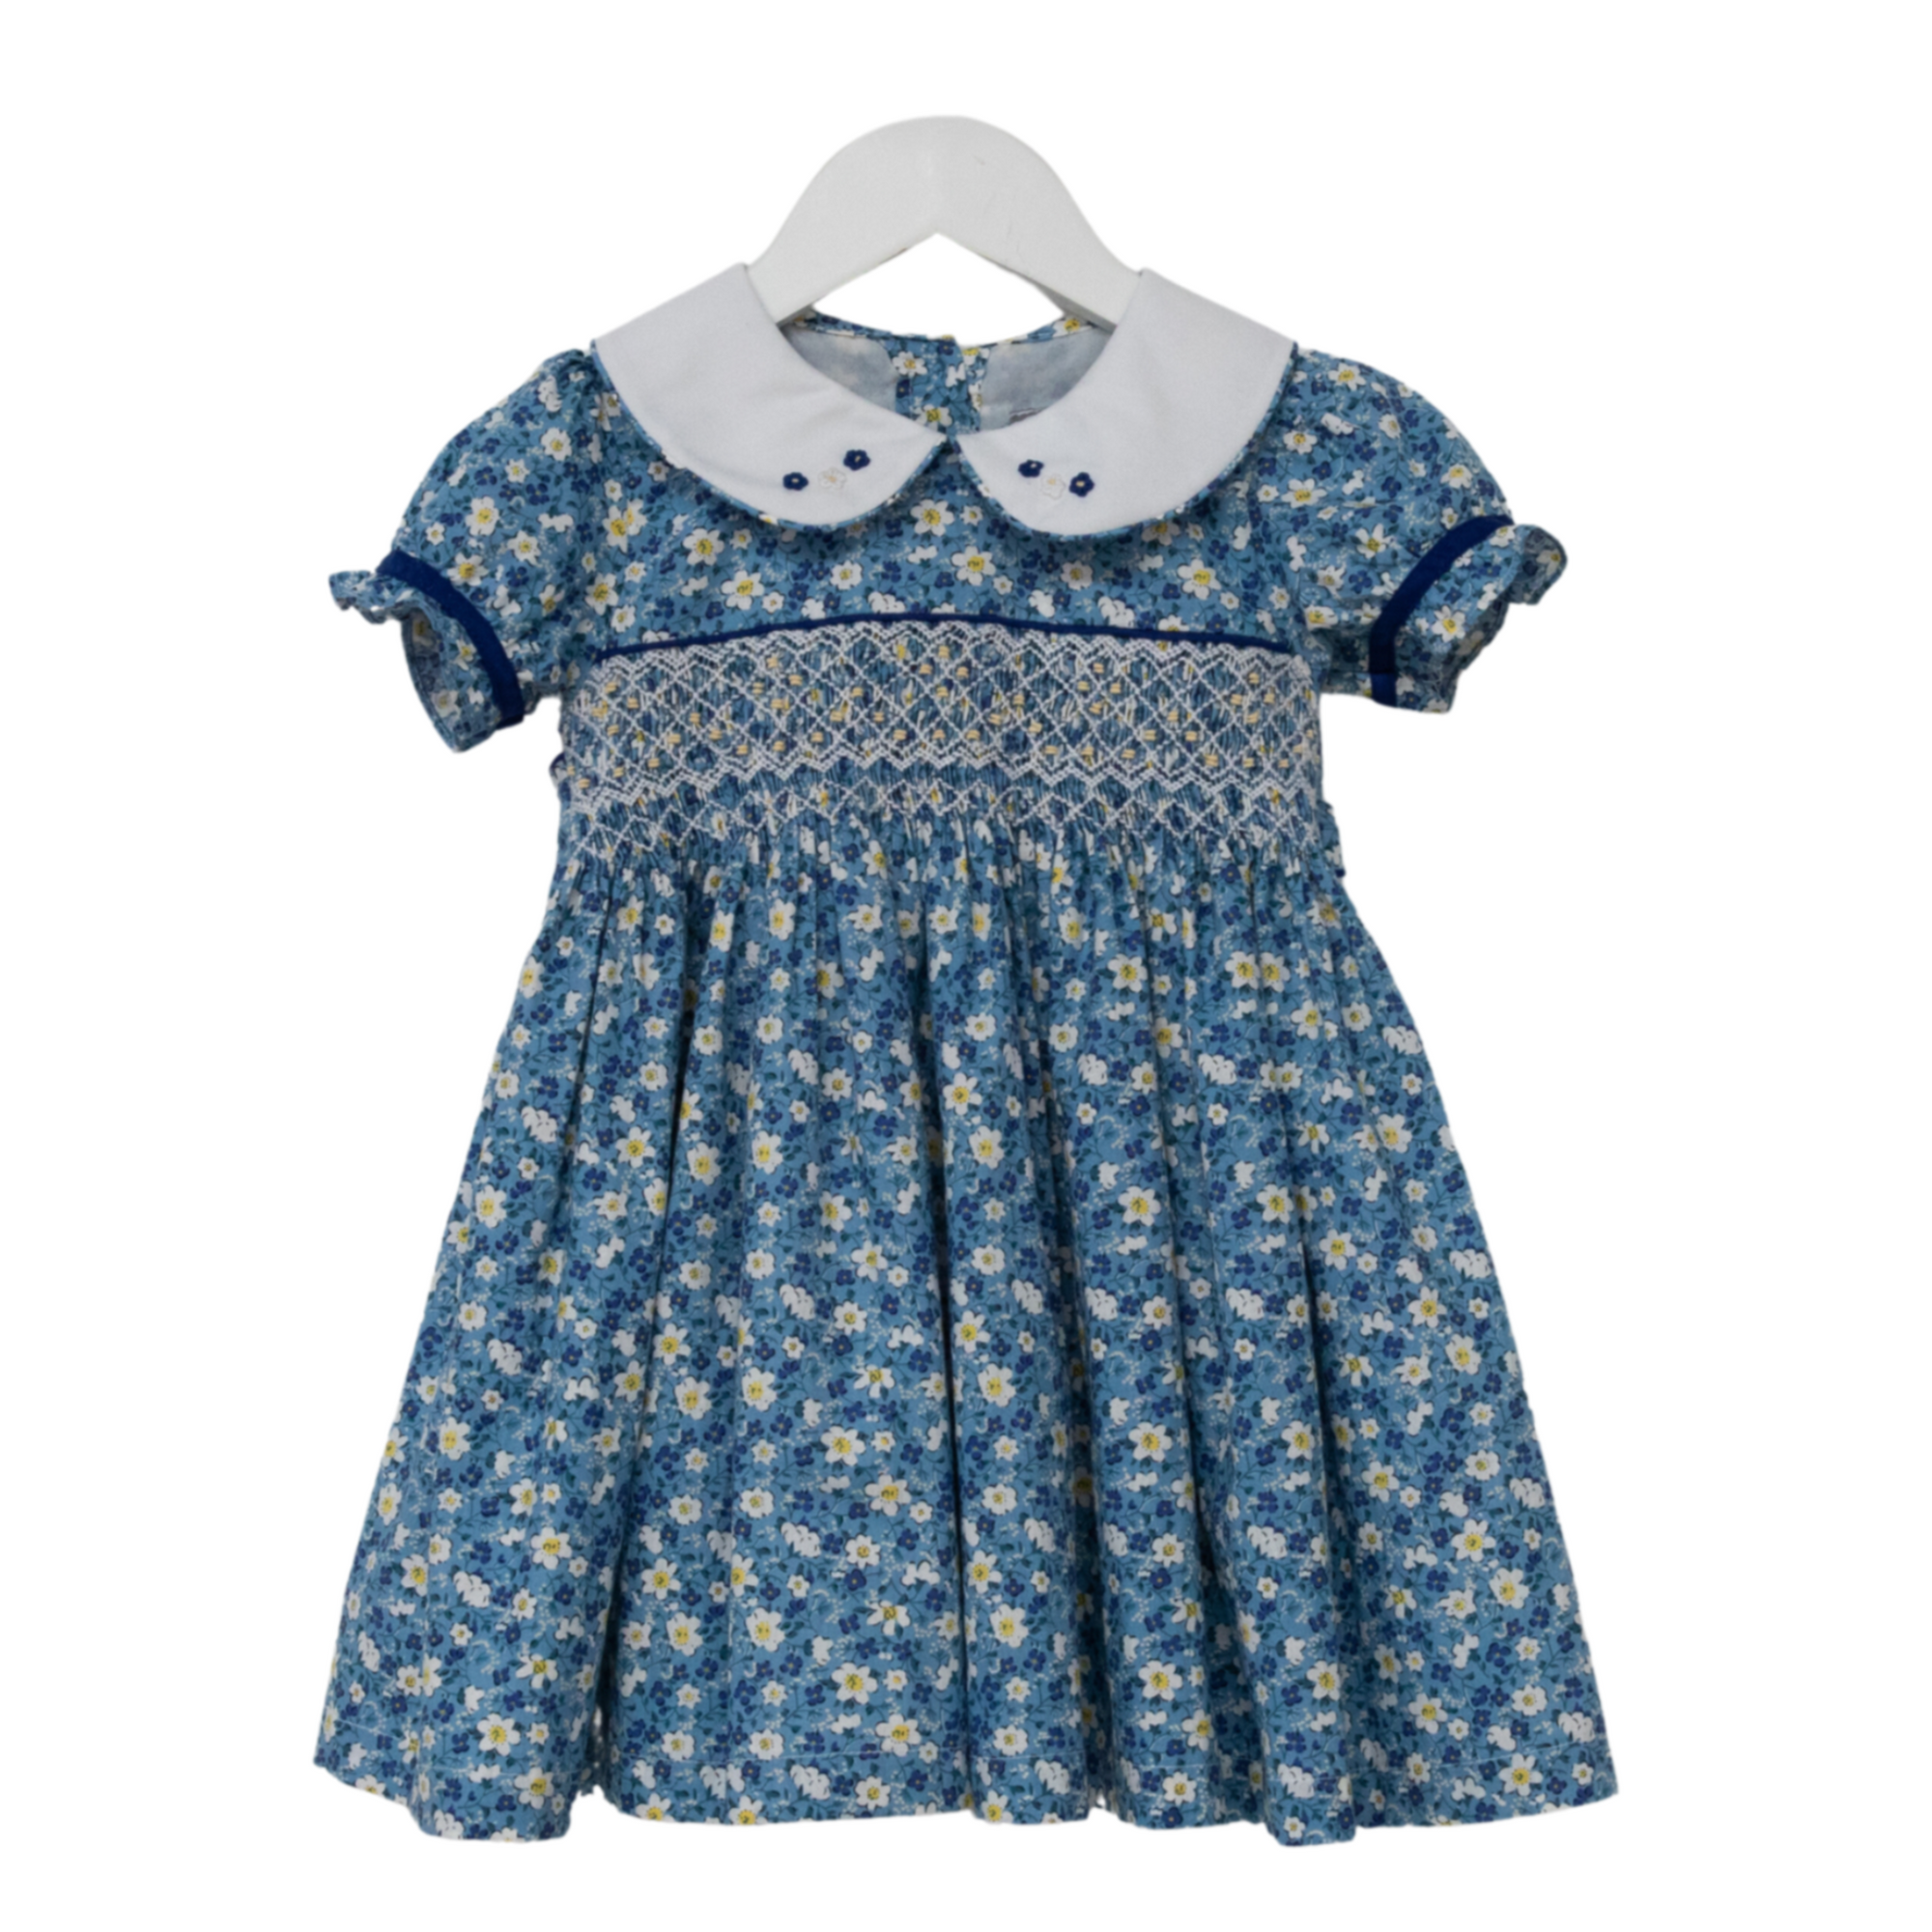 Smox Rox Sunny Dress - Yellow and Blue Florals